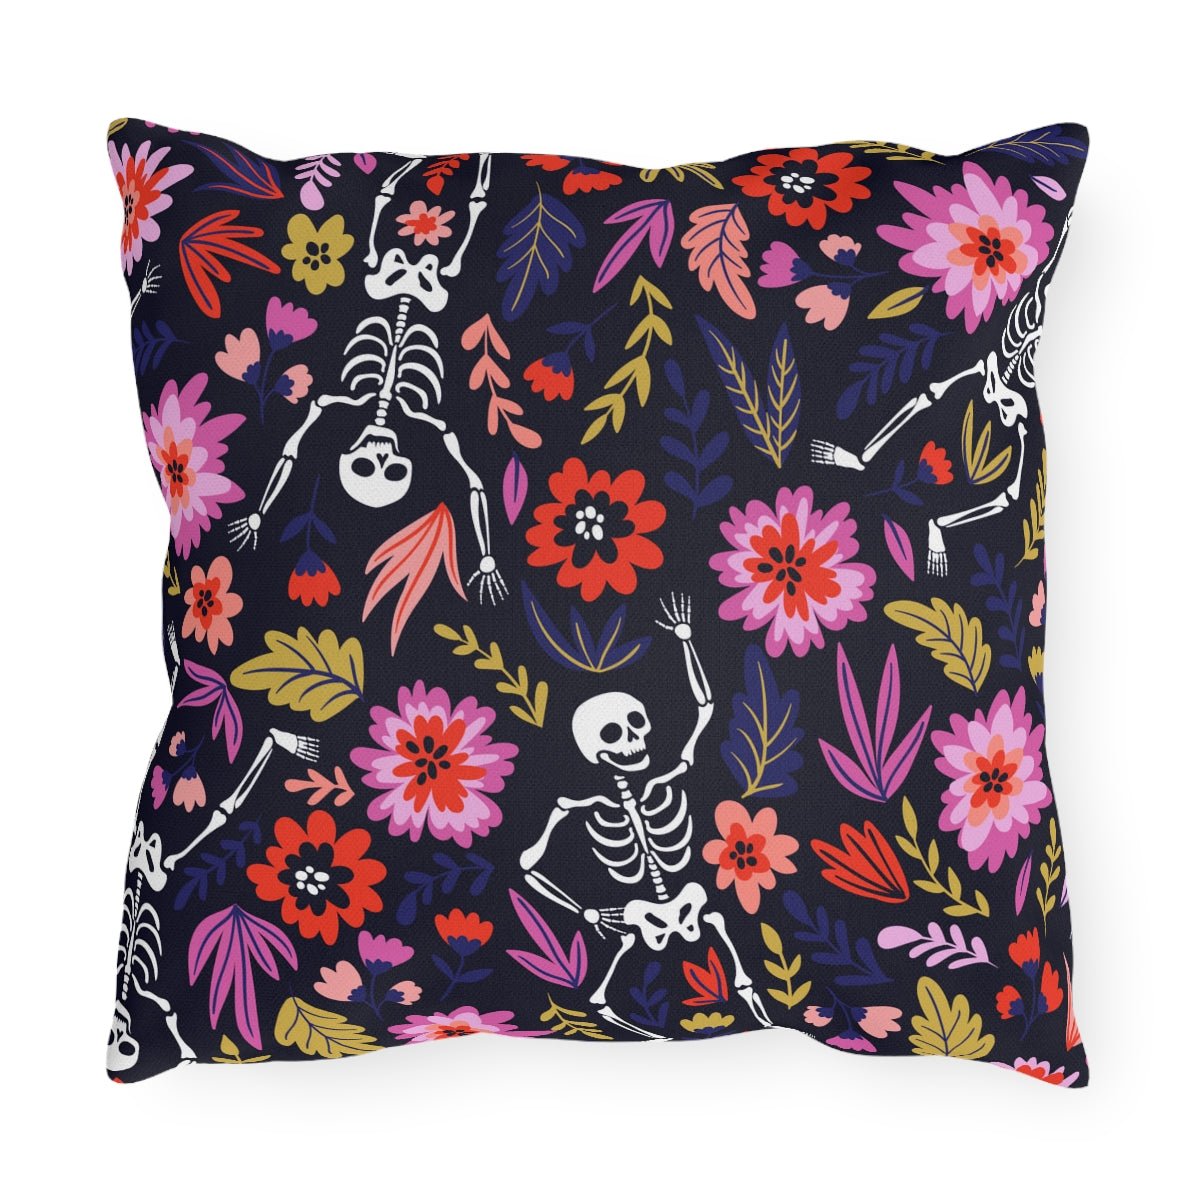 Dancing Skeletons Outdoor Pillow - Puffin Lime